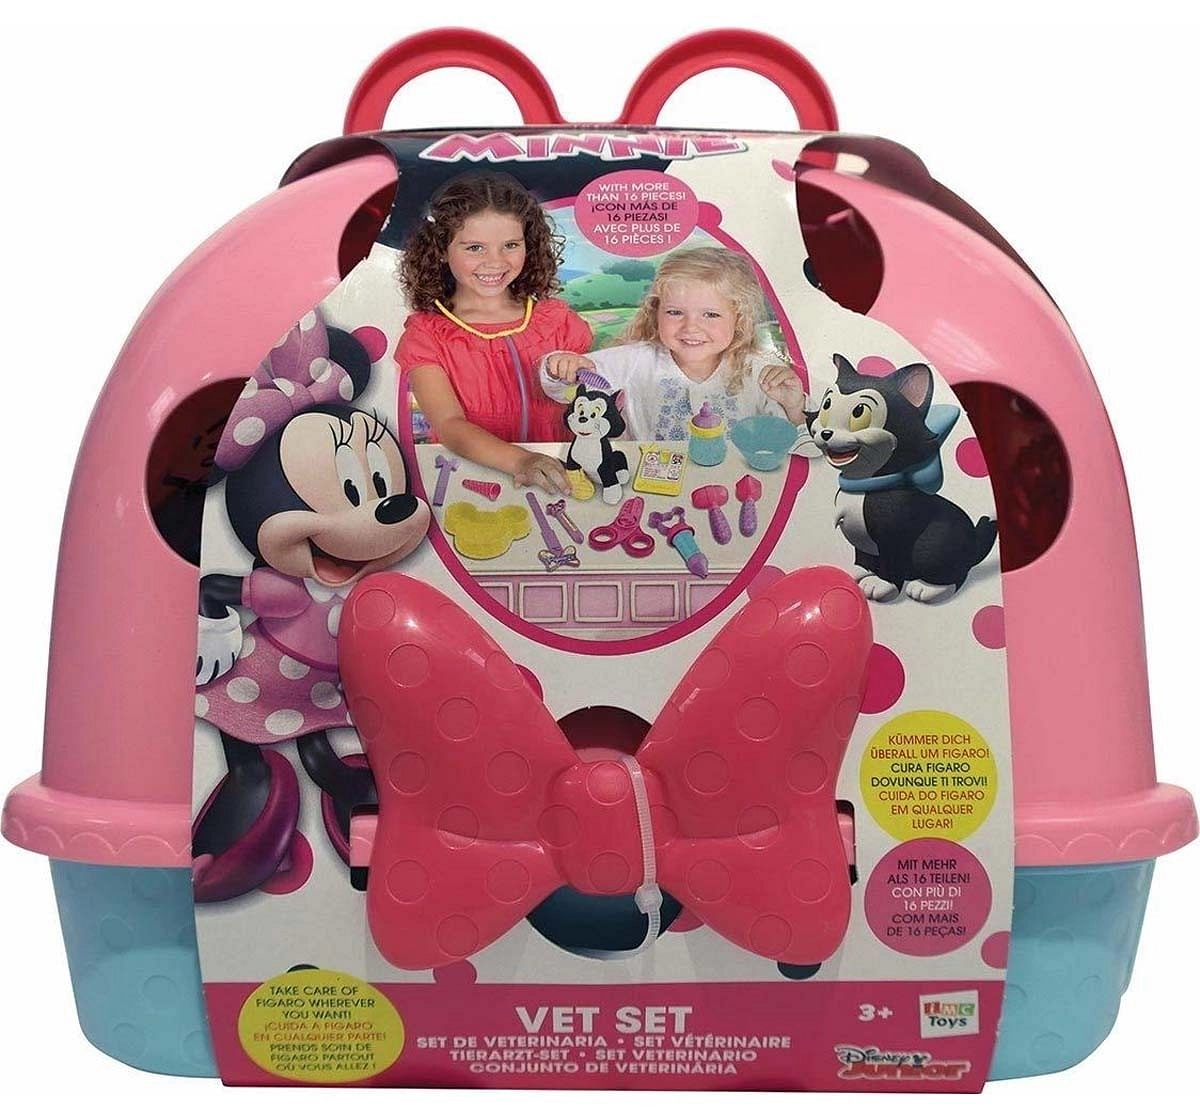 Imc Toys Disney Minnie Vet Set Roleplay Sets for Kids Age 3Y+